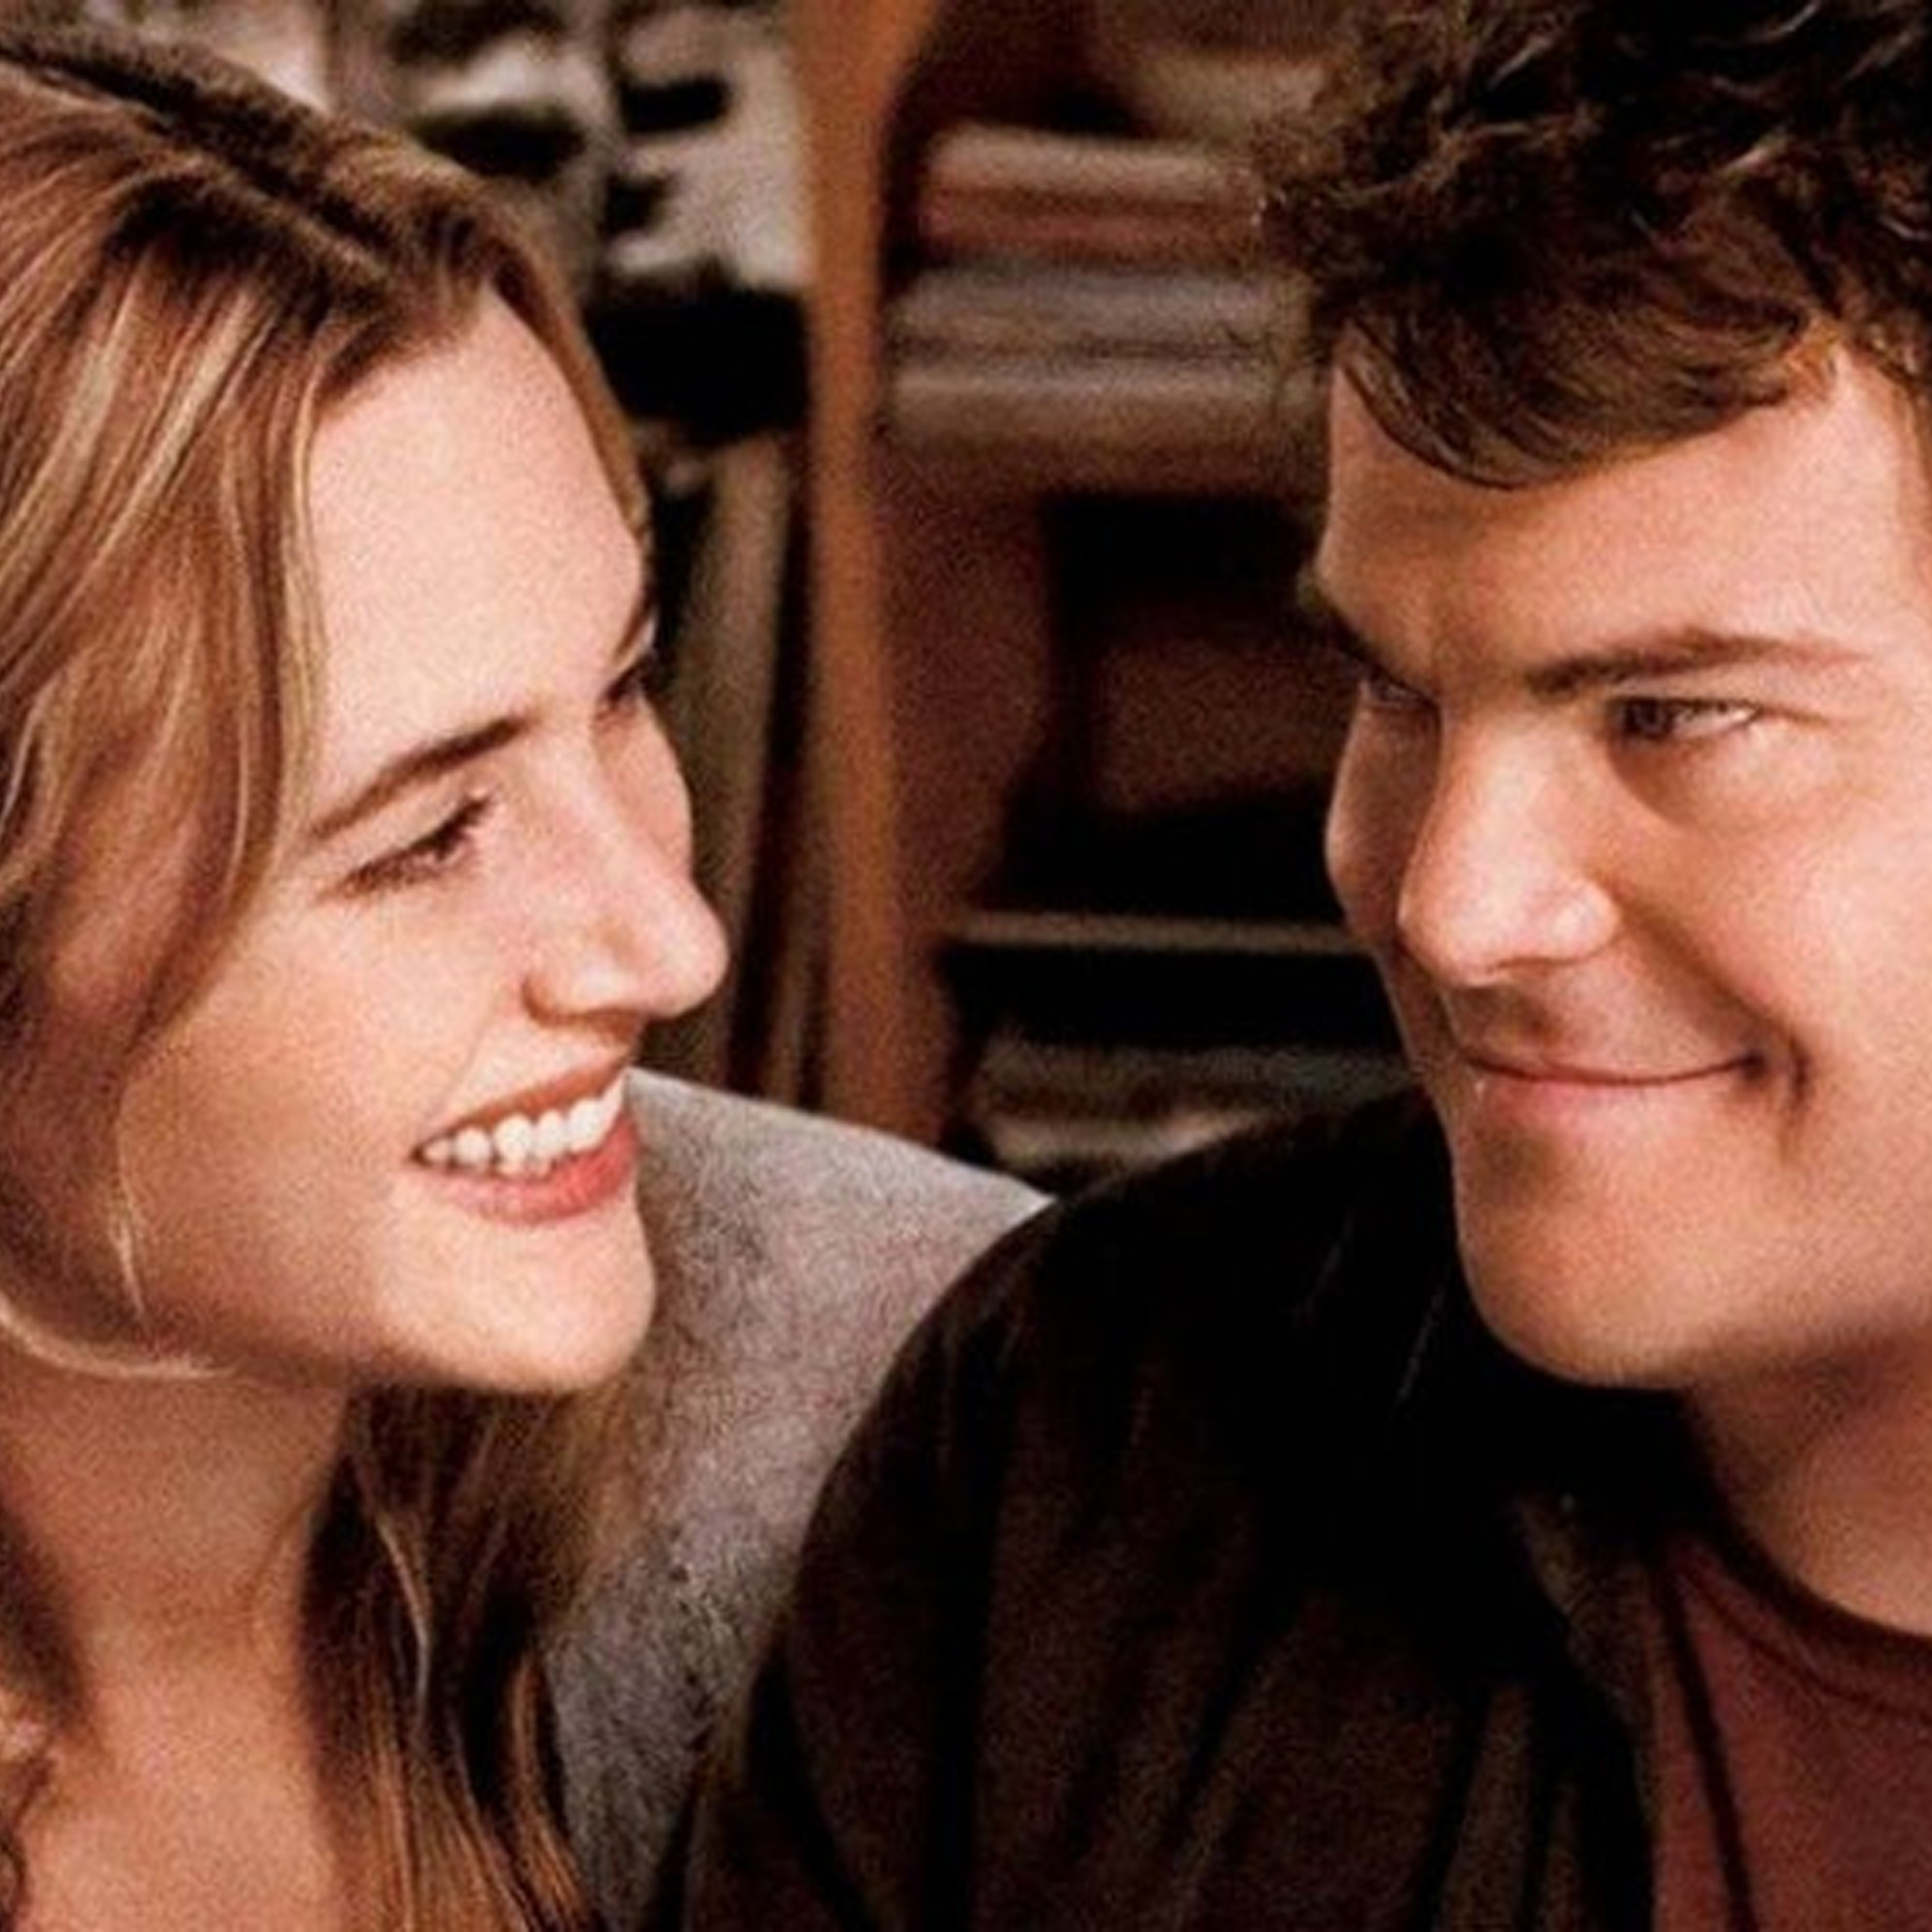 Kate Winslet and Jack Black in The Holiday.